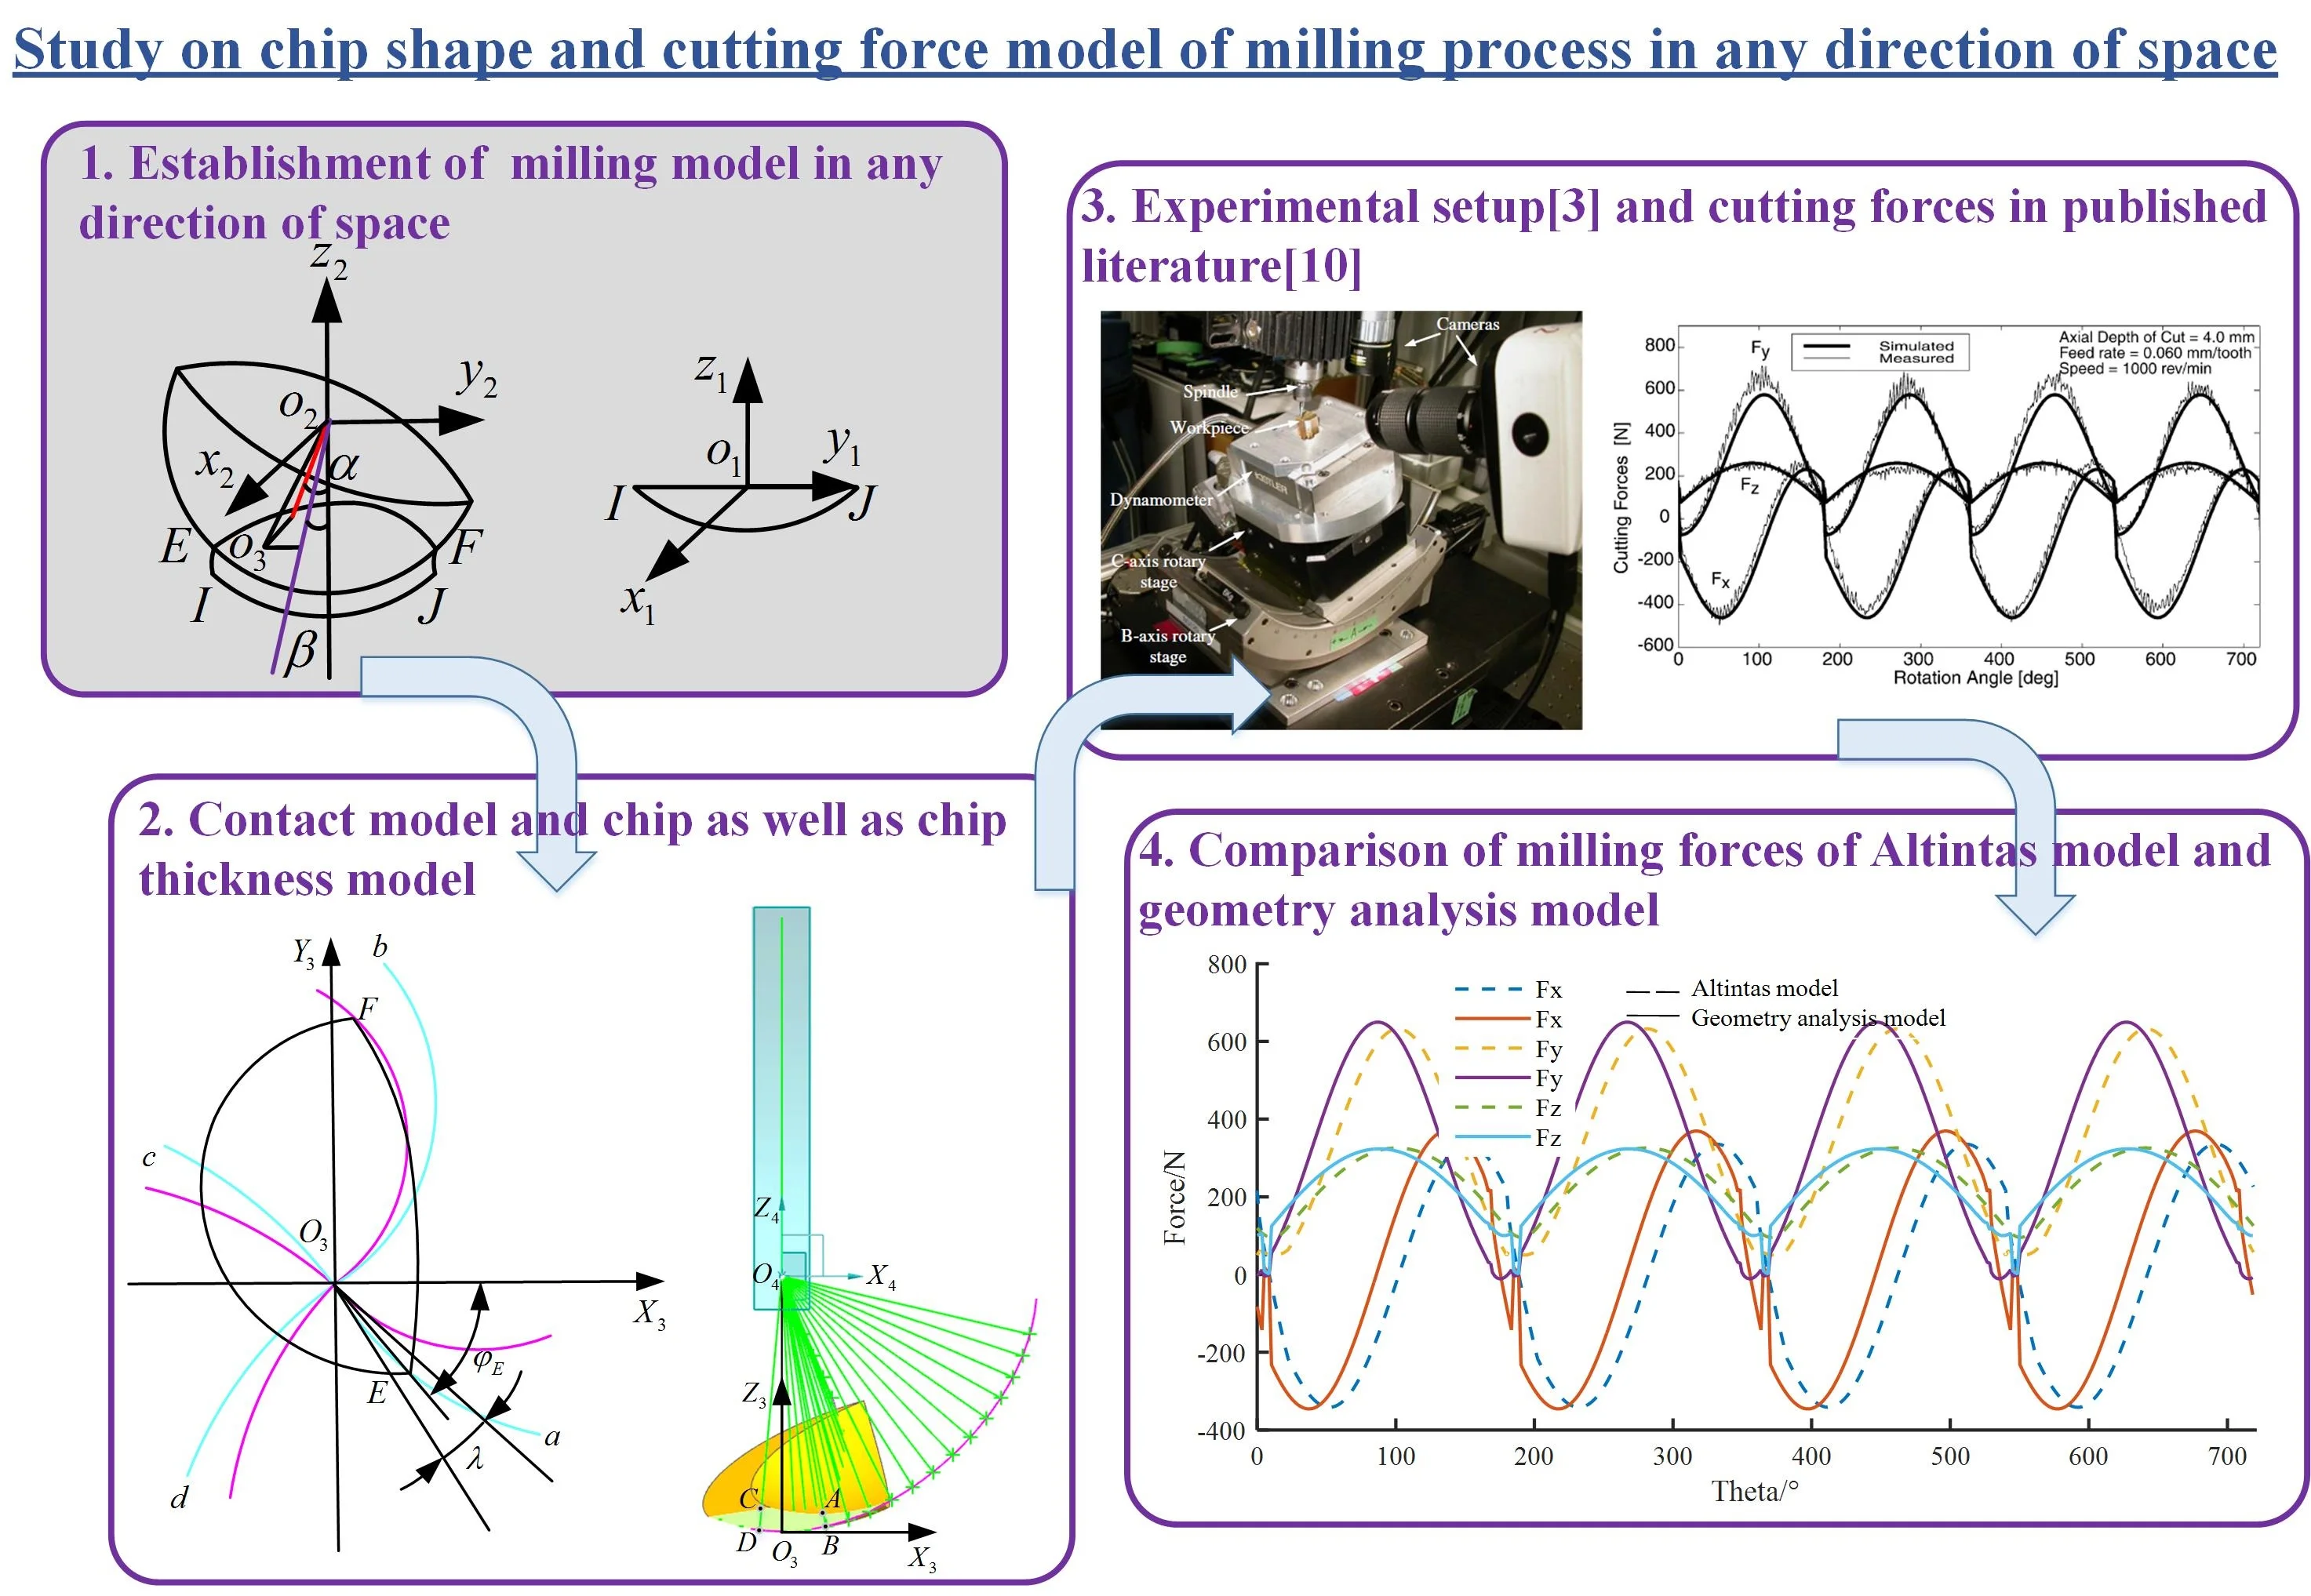 Study on chip shape and cutting force model of milling process in any direction of space